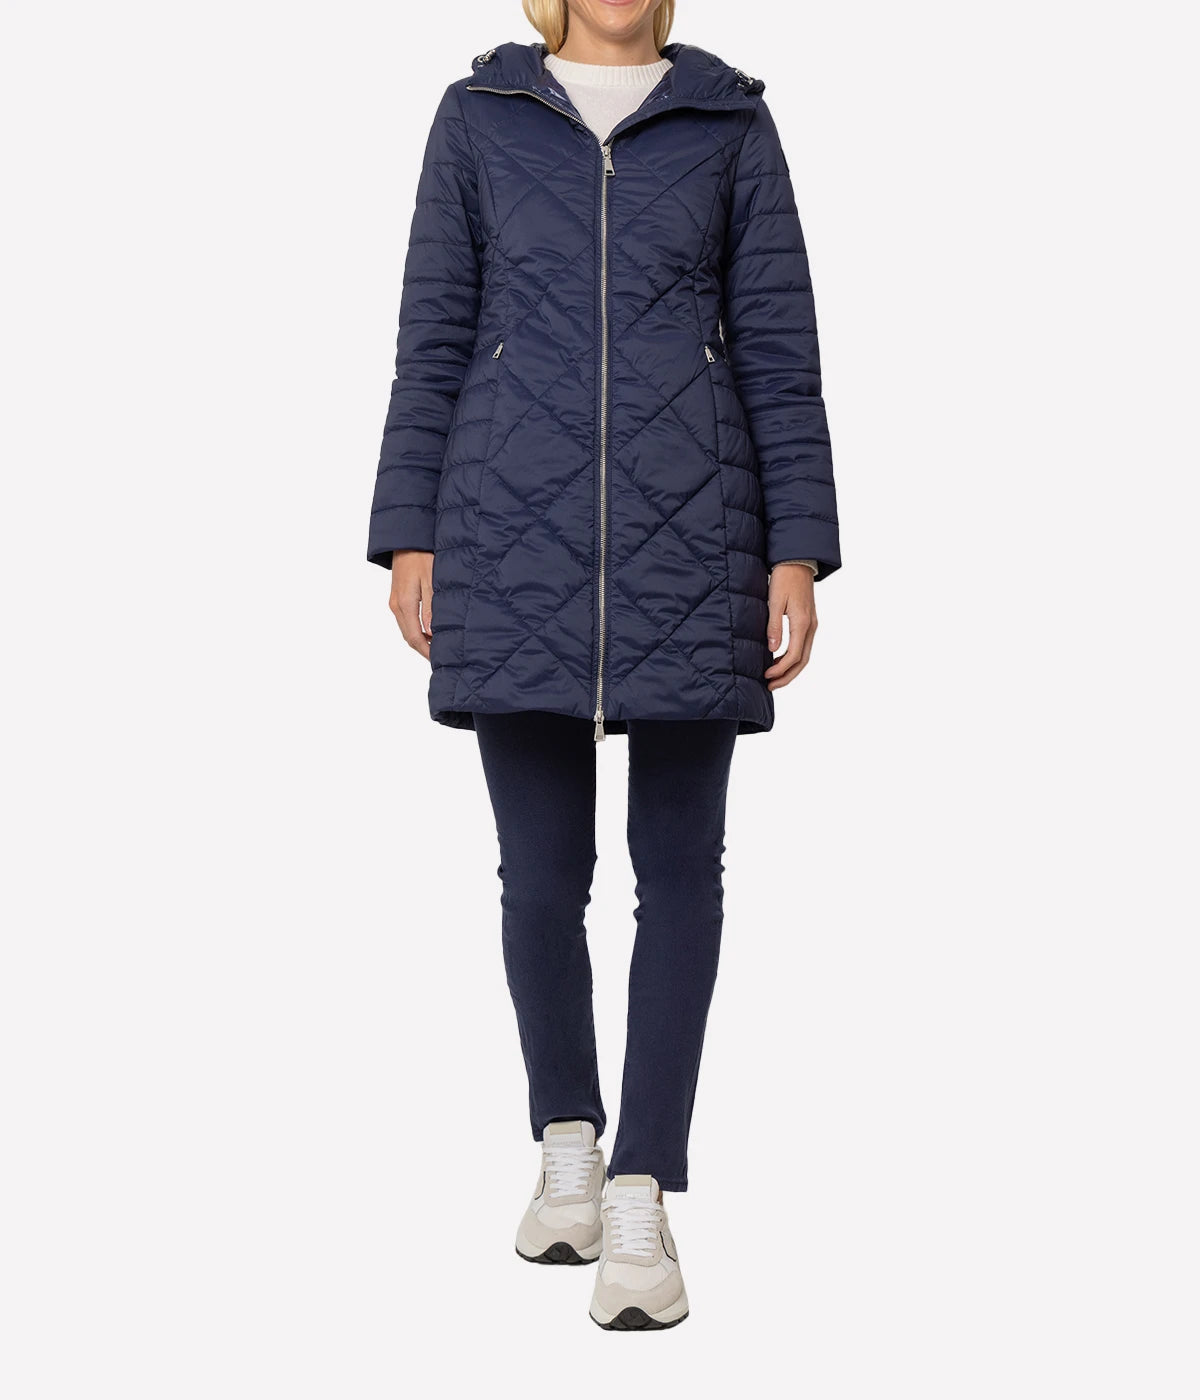 Padded Hooded Long Jacket in Midnight Blue